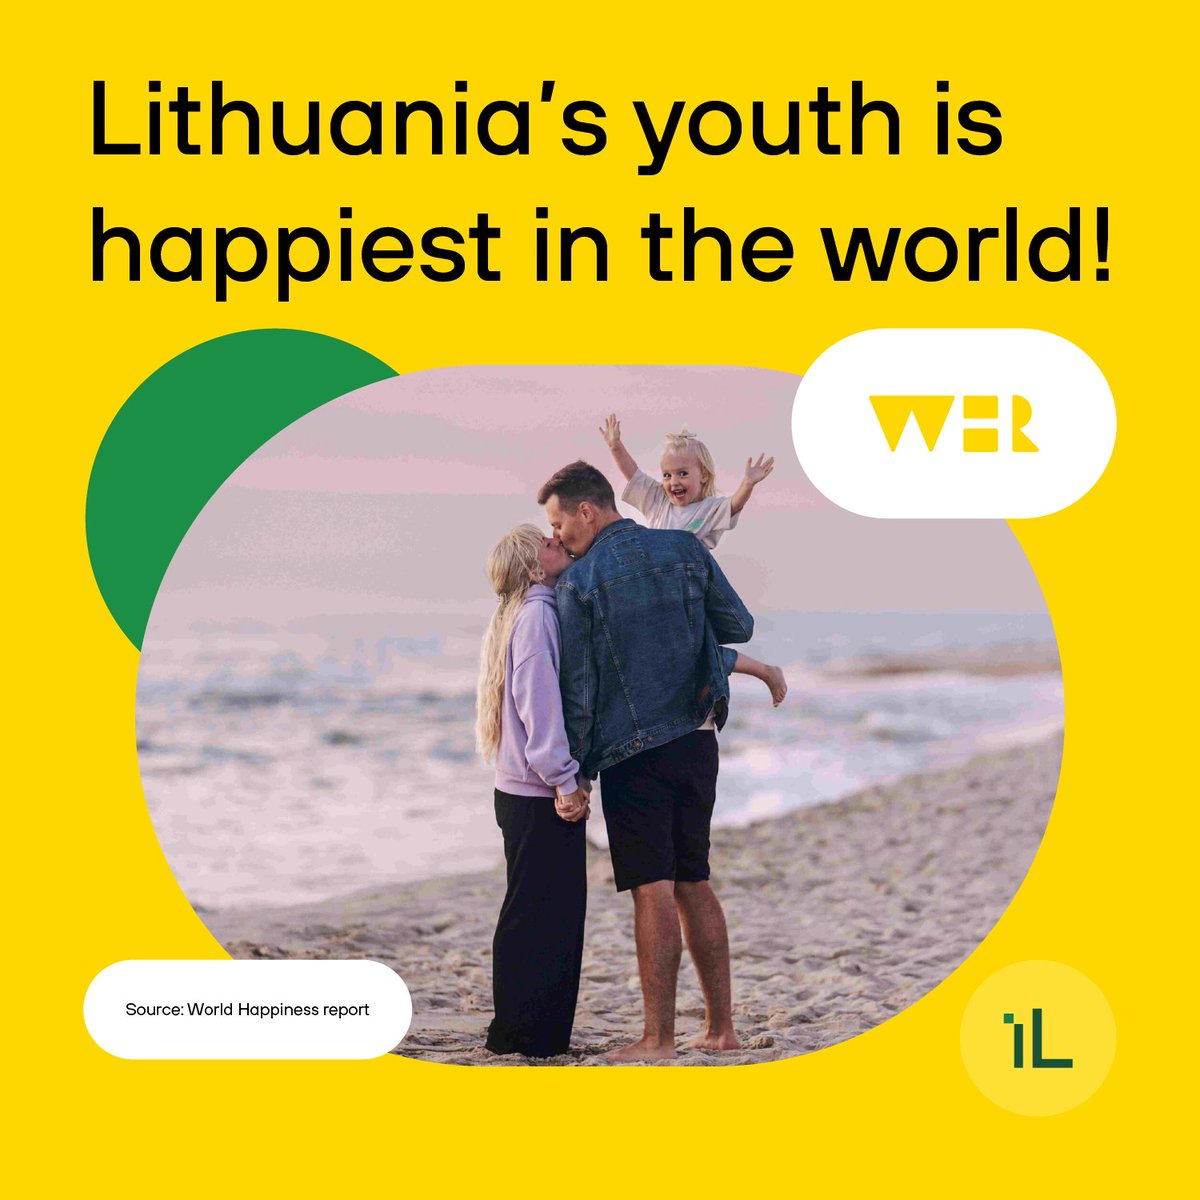 🌟 Lithuania's youth lead in happiness! Ranked #1 for those under 30 in the World Happiness Rating, #Lithuania climbed to 19th overall. Let's keep aiming higher for a happier future! 💛 @HappinessRpt